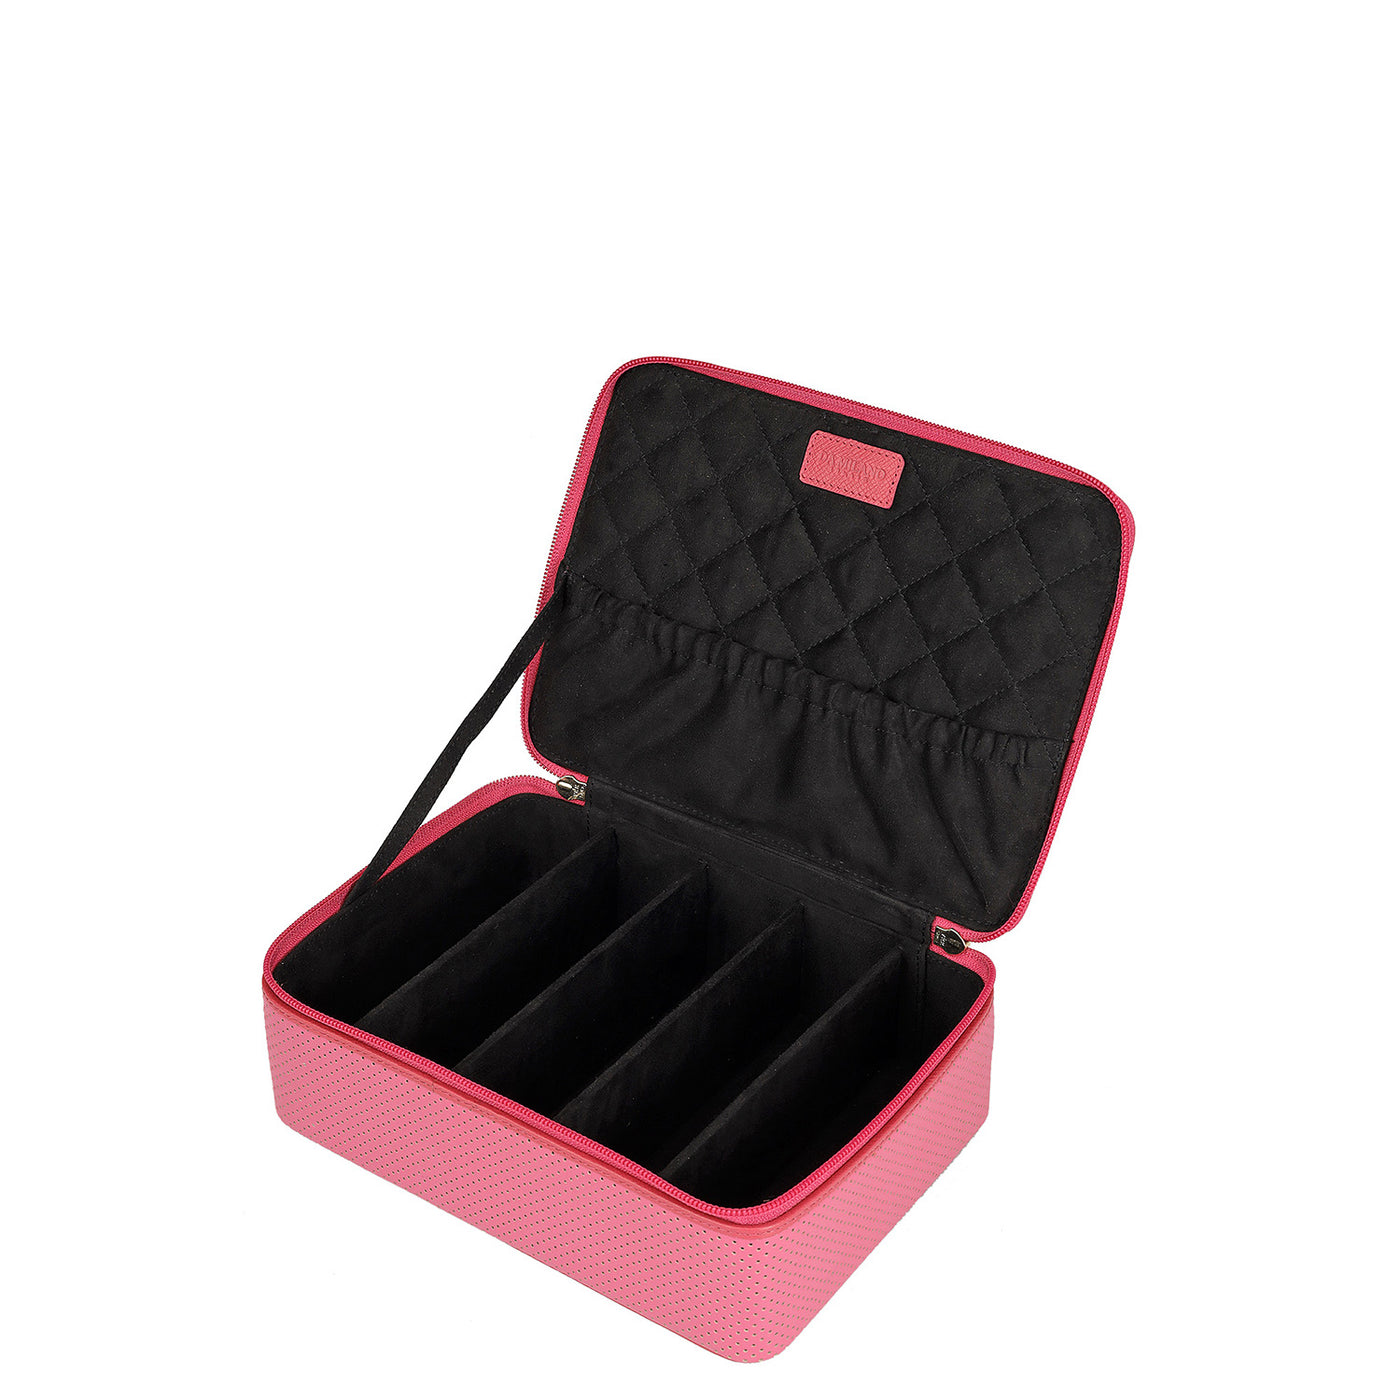 Pun Leather Spectacle Case - Hot Pink